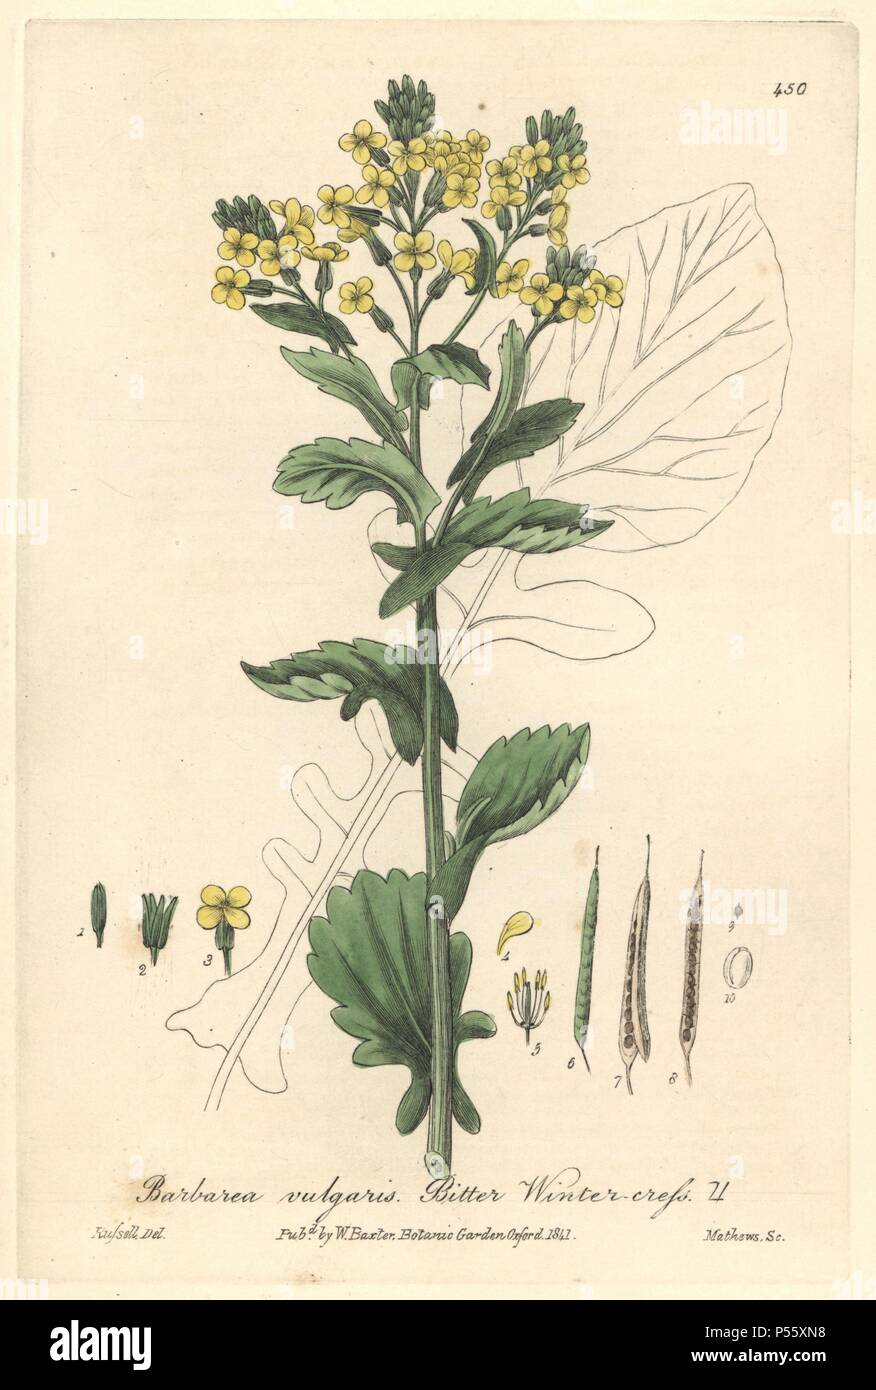 Bitter winter cress, Barbarea vulgaris. Handcoloured copperplate engraved by Charles Mathews from a drawing by Isaac Russell from William Baxter's 'British Phaenogamous Botany,' Oxford, 1841. Scotsman William Baxter (1788-1871) was the curator of the Oxford Botanic Garden from 1813 to 1854. Stock Photo